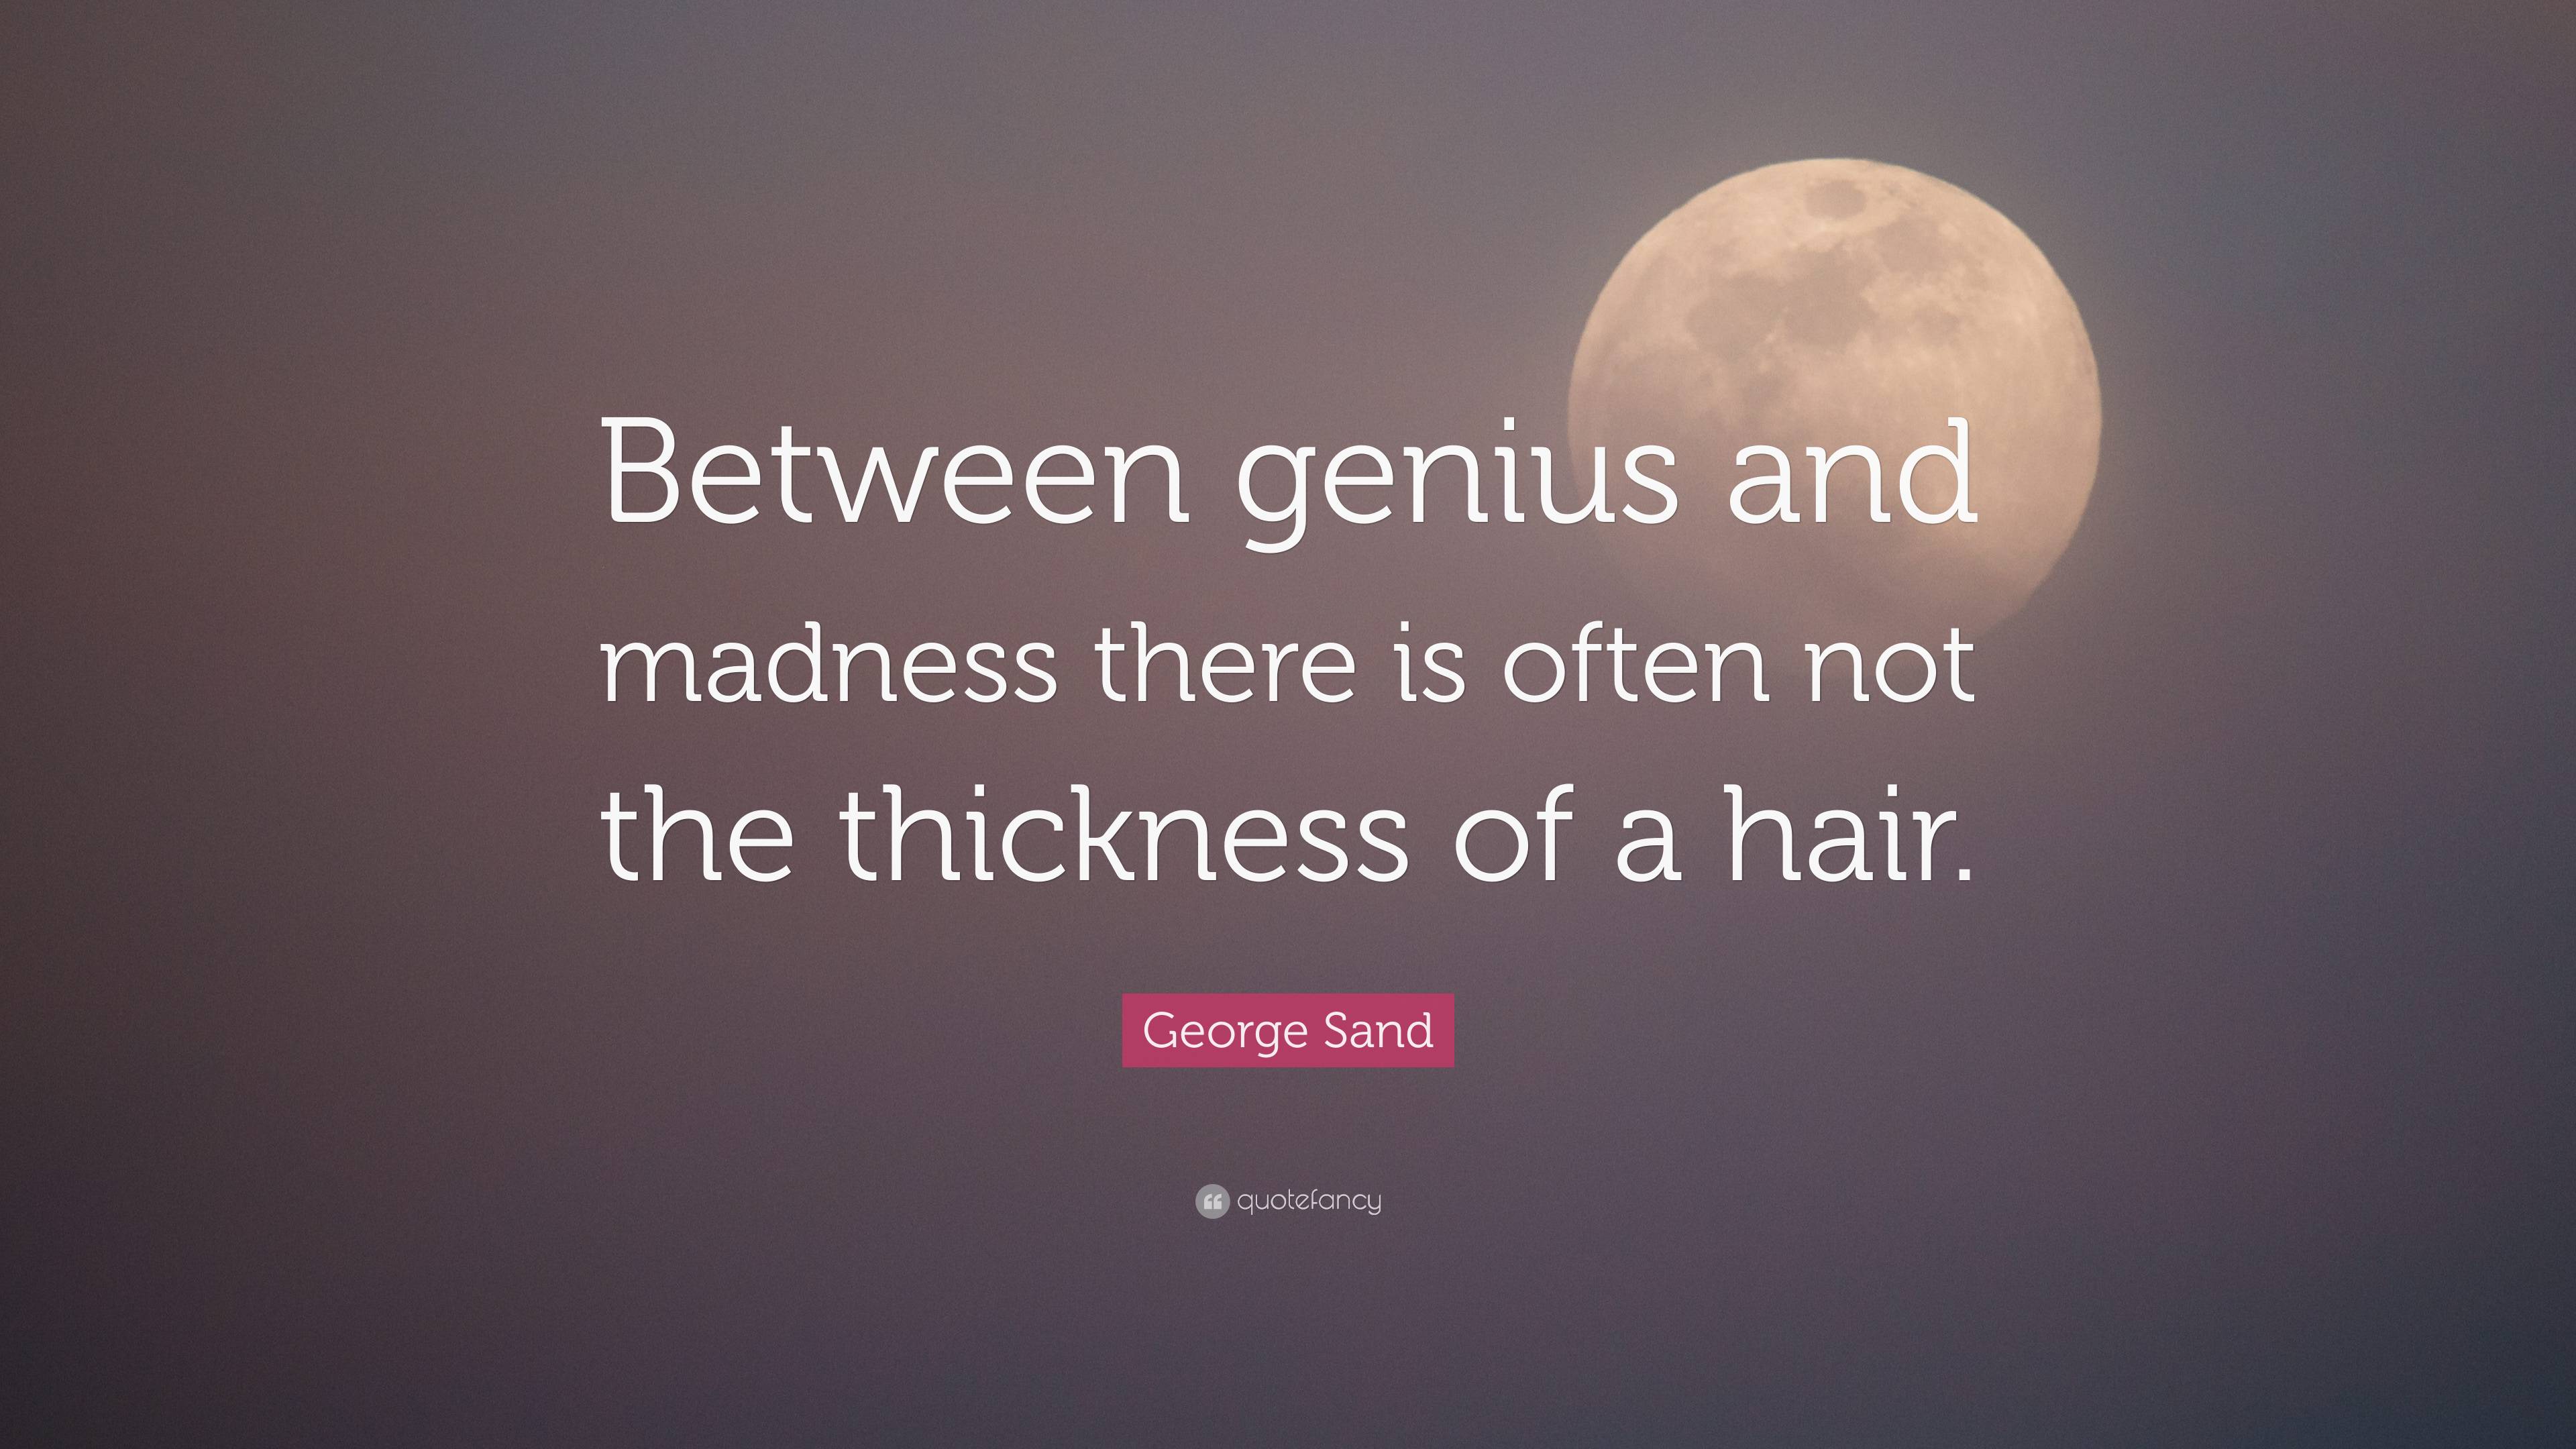 7094077-George-Sand-Quote-Between-genius-and-madness-there-is-often-not.jpg